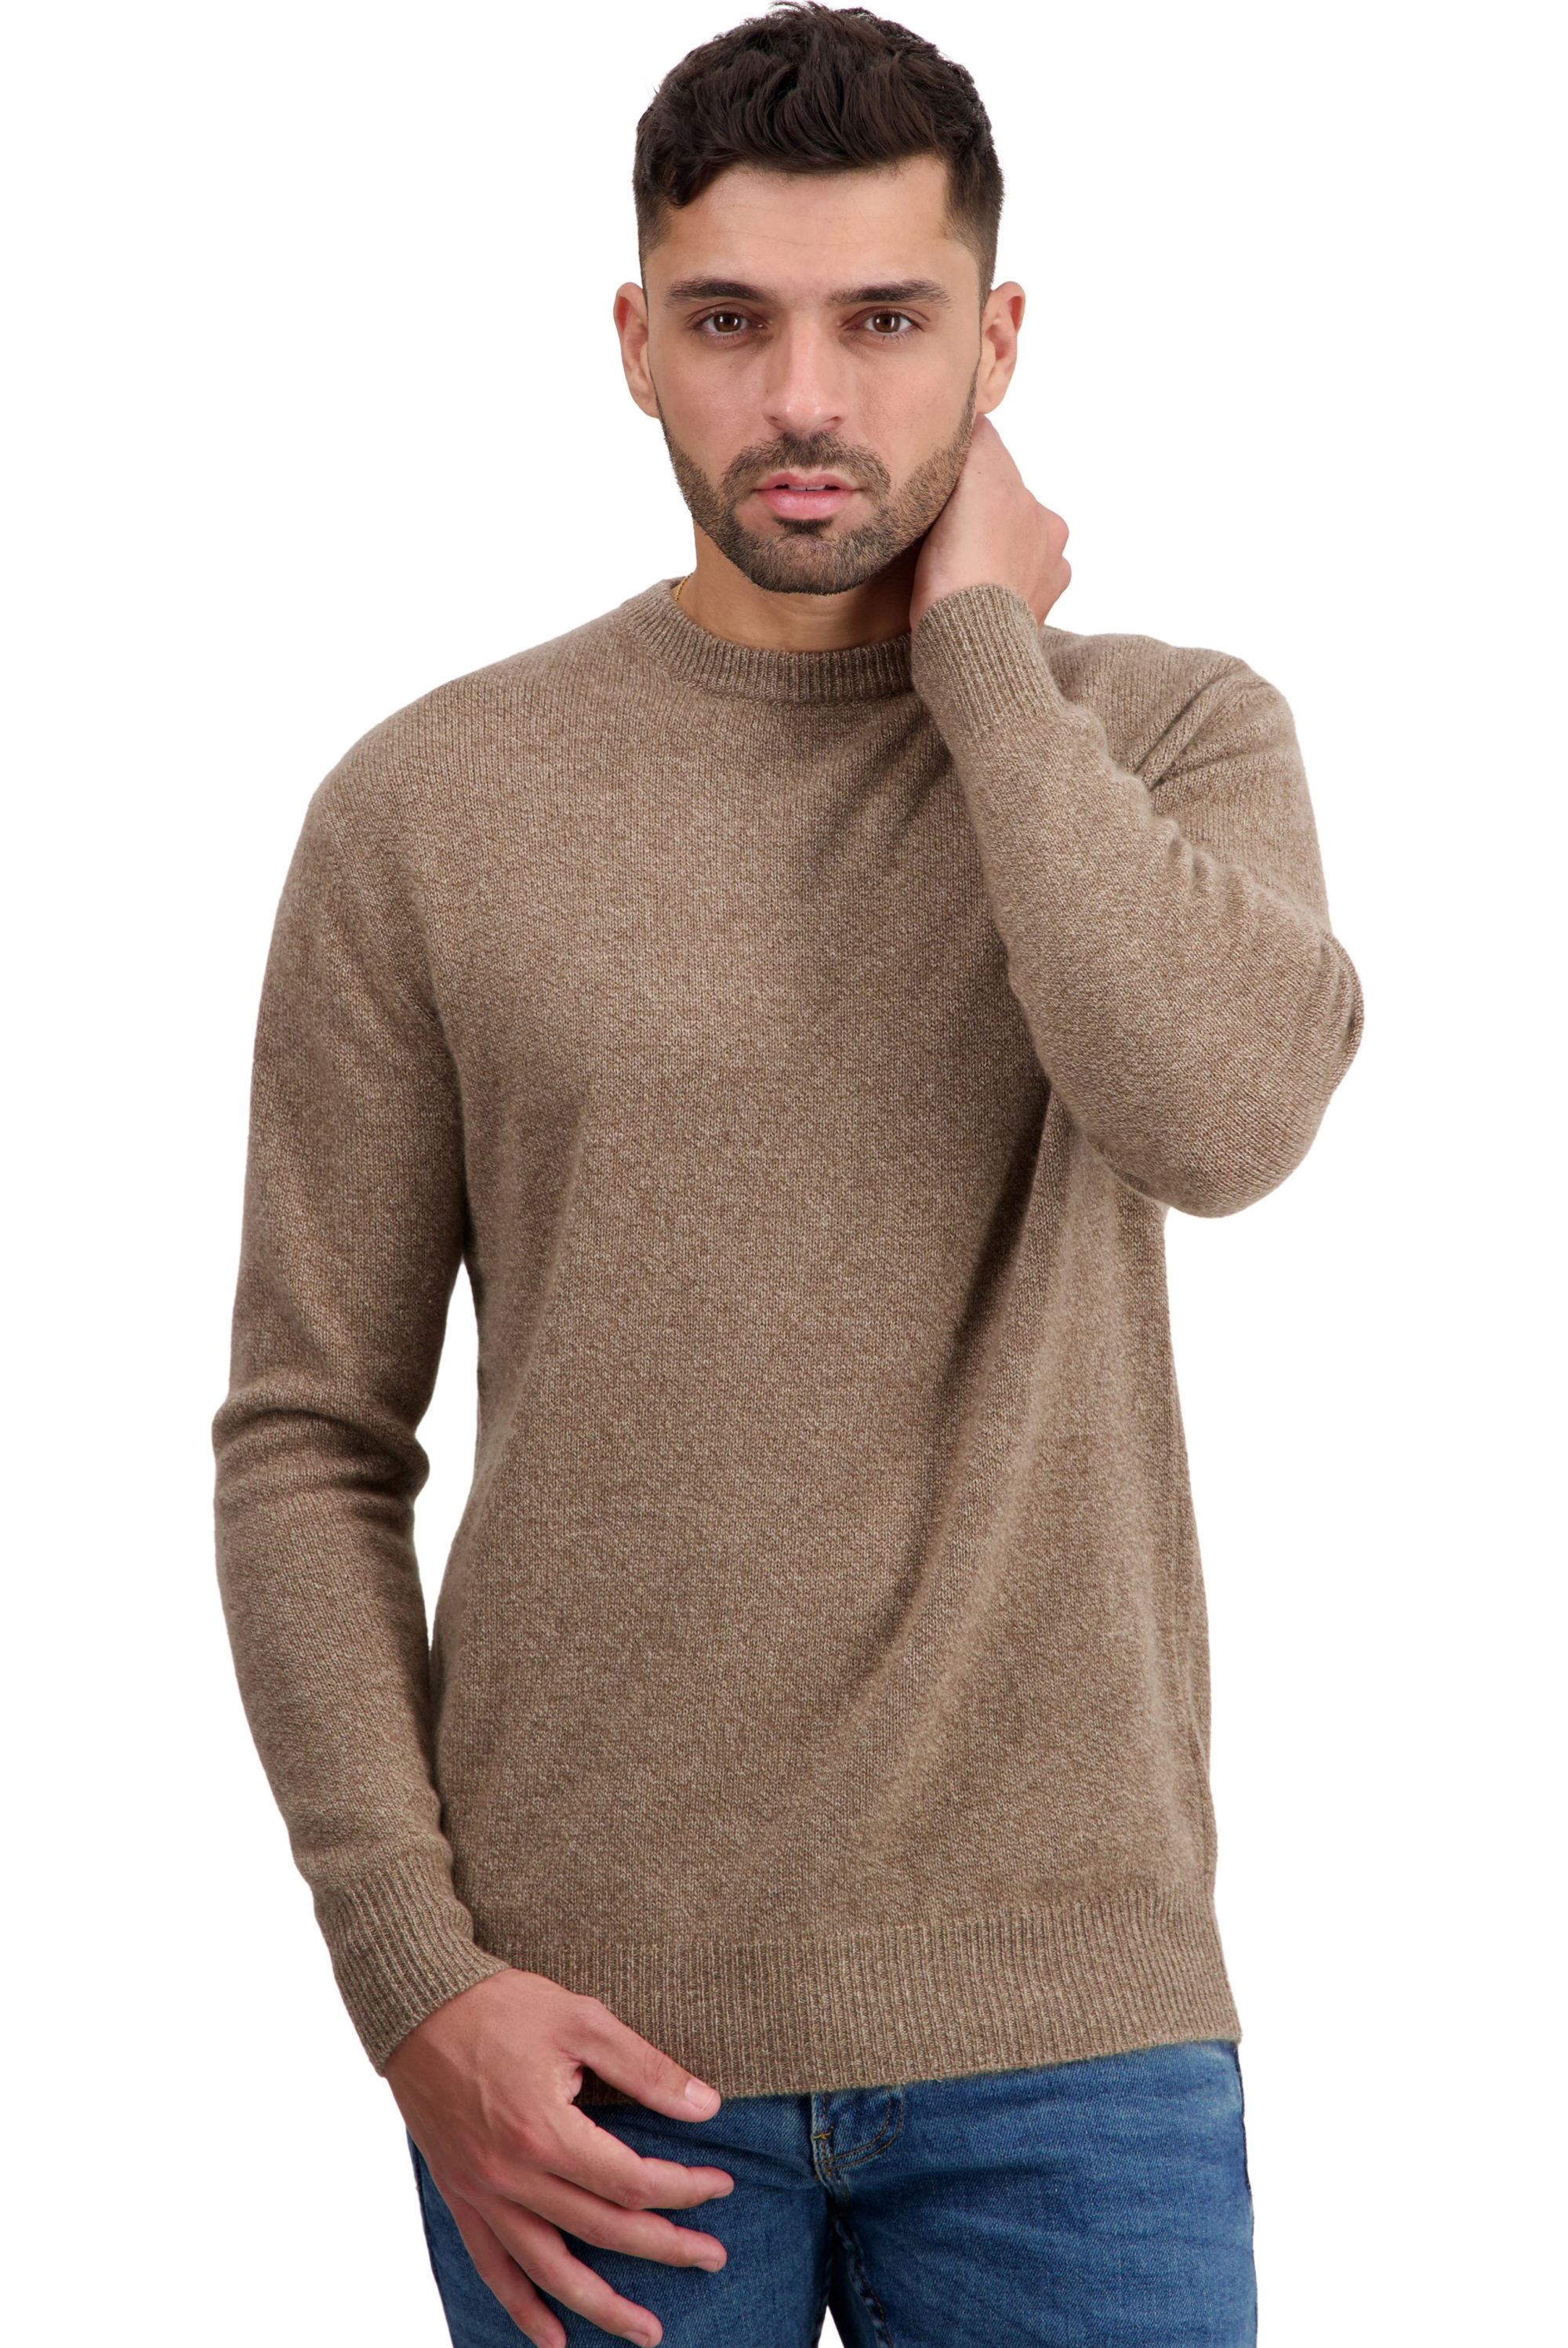 Cachemire pull homme col rond touraine first tan marl 2xl